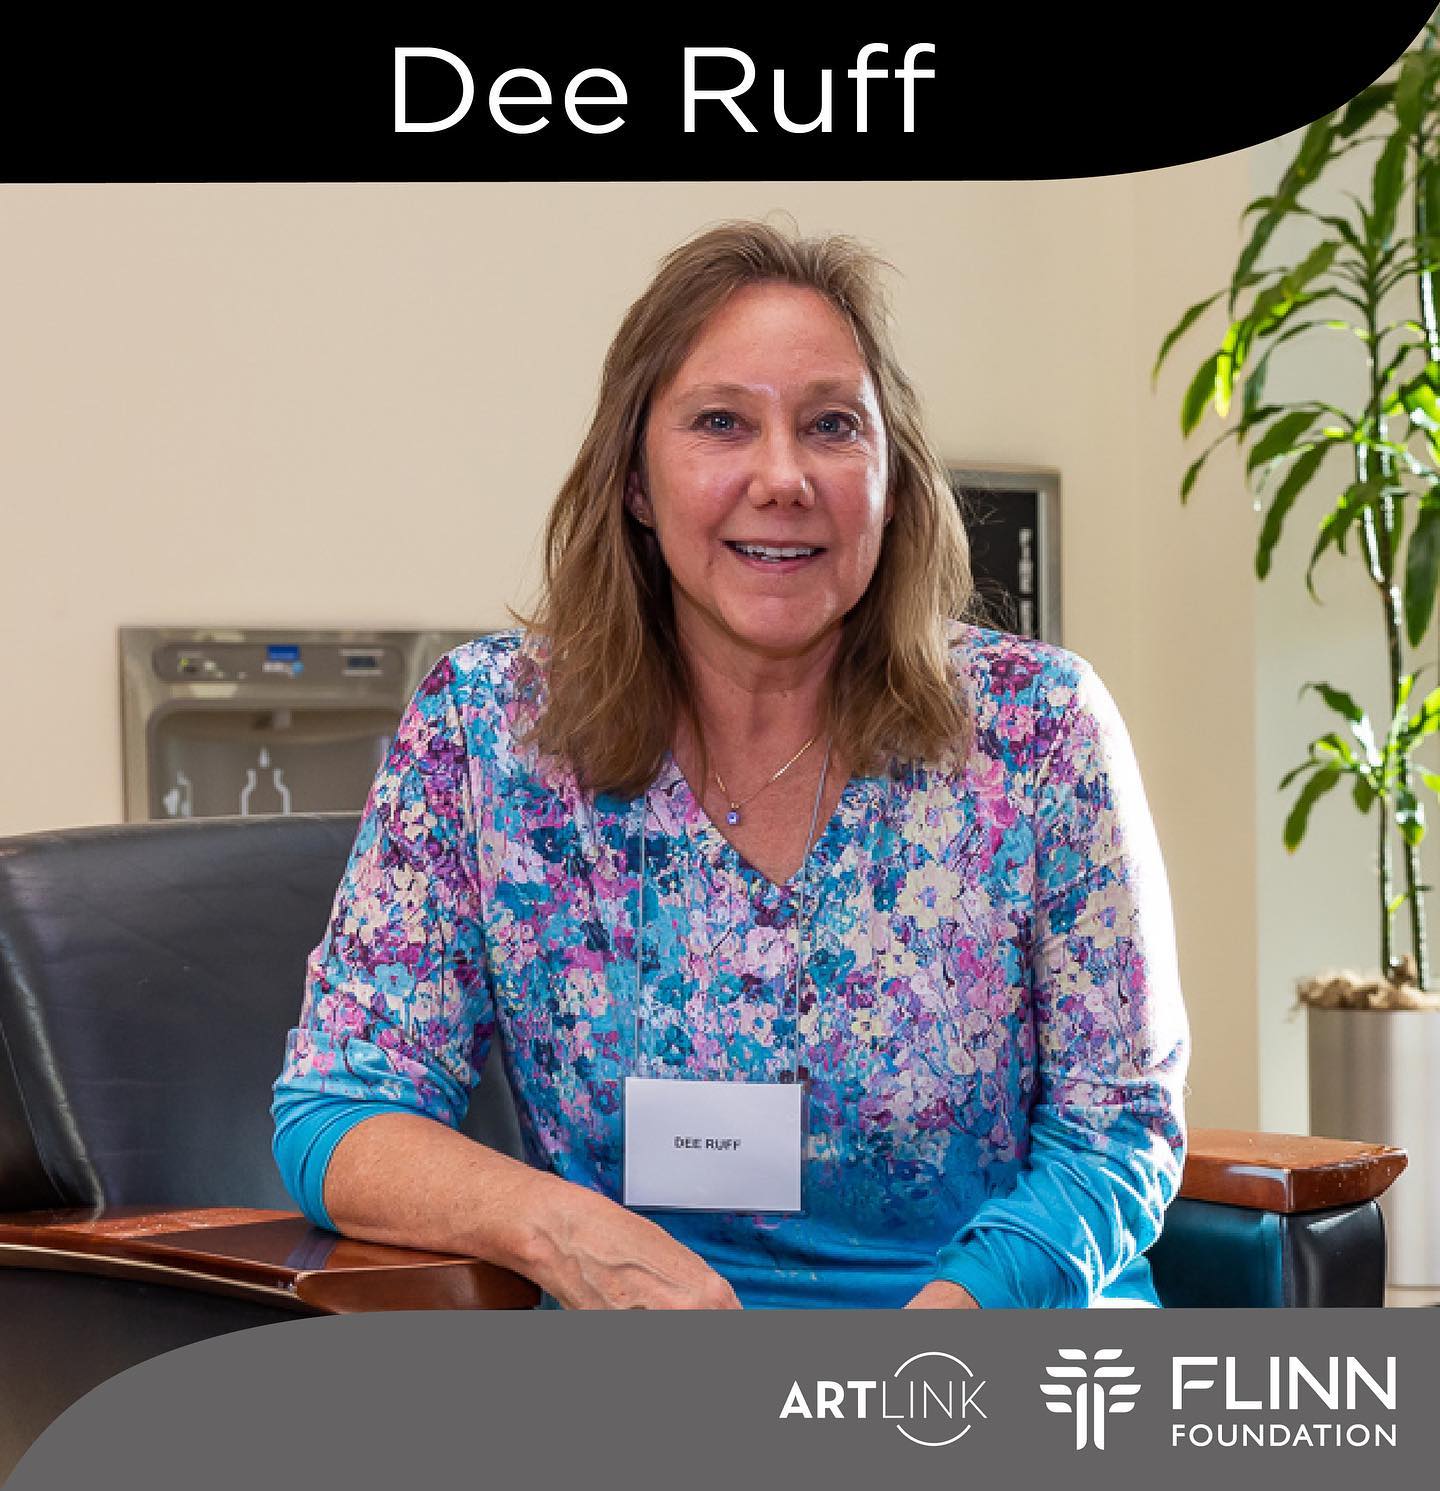 Congratulations to Dee Ruff one of the selected artists for the inaugural exhibition of the Flinn Foundation Art Program! The program is a complement to the Foundation's grantmaking focus and demonstrates the importance of the arts. 

“I’ve always been captivated by the beauty of colors and textures, especially those found in the natural world.  As a Contemporary Abstract Mosaic & Mixed Media Arizona Artist, I have used my studies and artistic skills to express my love of nature and culture. I try to offer my art collectors distinctive artworks. The five pieces I am submitting for this exhibition are from my Illuminated Shards Spring Collection. This Collection is about Hope, Renewal, & Rebirth, and was inspired by the colors and textures of spring. Within the designs, reflective elements beneath the transparent glass, create a subtle sparkling effect, if placed in bright, focused lighting.” -Dee Ruff

We thank the Flinn Foundation for this collaborative partnership and their continued support of Arizona’s arts and culture community.

To learn more about this program please visit us: https://artlinkphx.org/flinn/